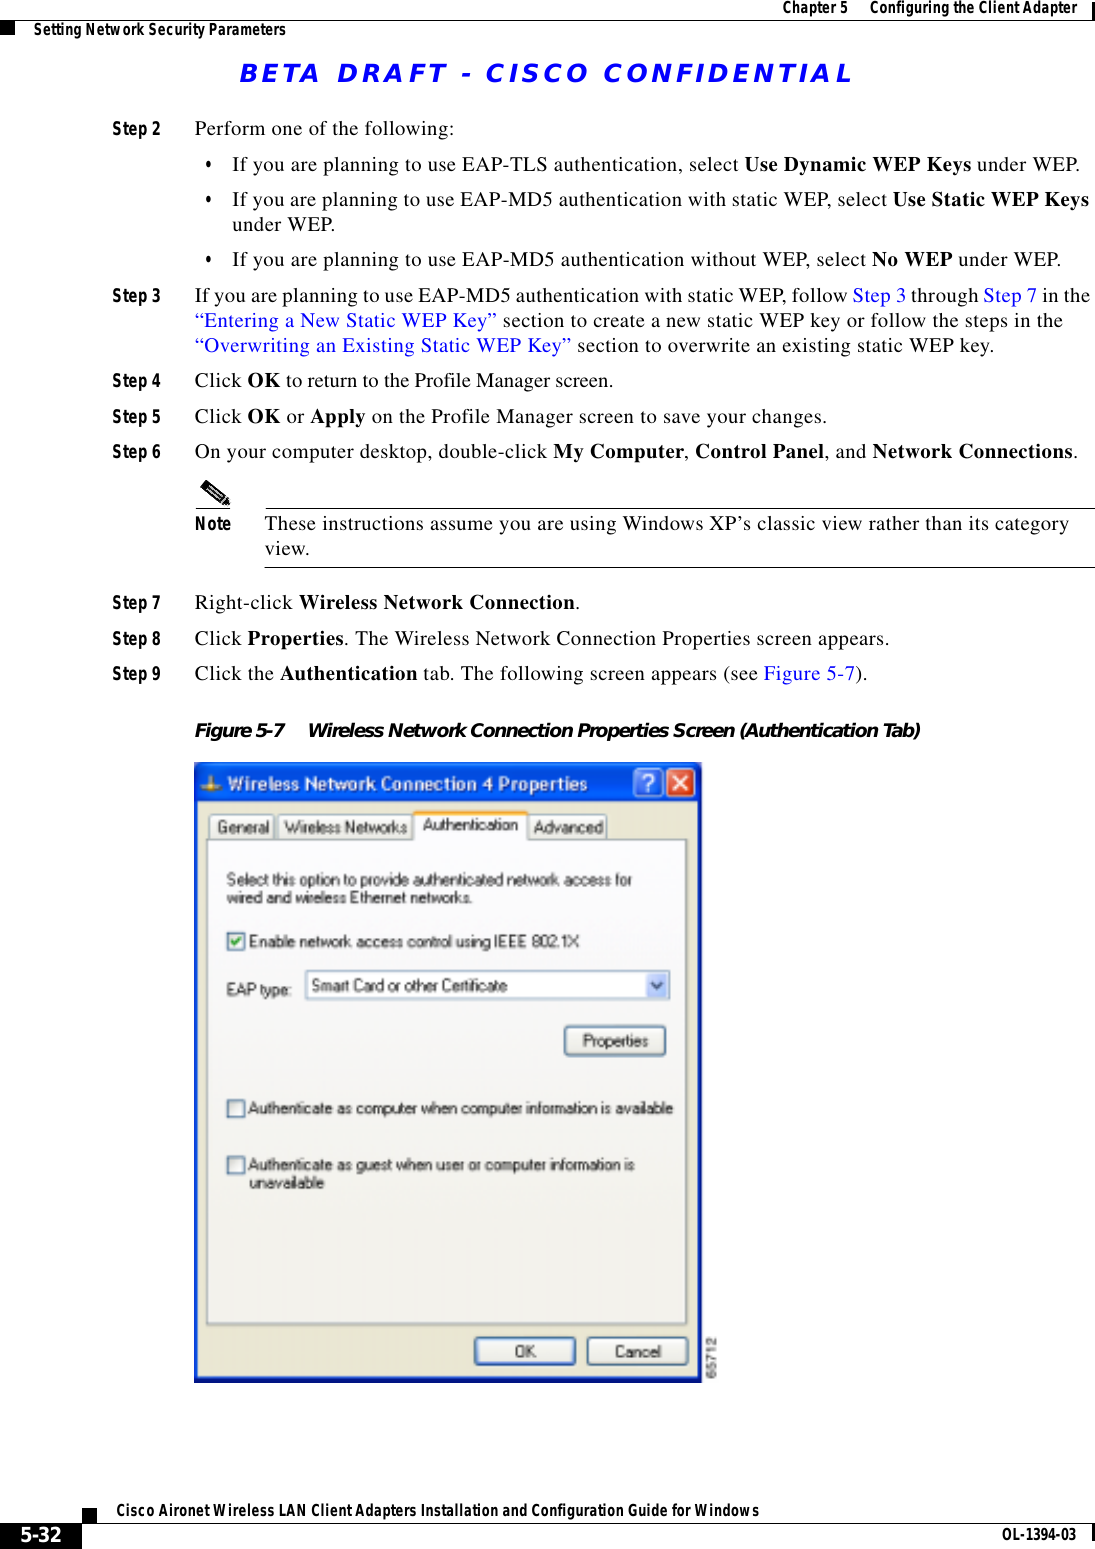 BETA DRAFT - CISCO CONFIDENTIAL5-32Cisco Aironet Wireless LAN Client Adapters Installation and Configuration Guide for Windows OL-1394-03Chapter 5      Configuring the Client AdapterSetting Network Security ParametersStep 2 Perform one of the following:•If you are planning to use EAP-TLS authentication, select Use Dynamic WEP Keys under WEP.•If you are planning to use EAP-MD5 authentication with static WEP, select Use Static WEP Keys under WEP.•If you are planning to use EAP-MD5 authentication without WEP, select No WEP under WEP.Step 3 If you are planning to use EAP-MD5 authentication with static WEP, follow Step 3 through Step 7 in the “Entering a New Static WEP Key” section to create a new static WEP key or follow the steps in the “Overwriting an Existing Static WEP Key” section to overwrite an existing static WEP key.Step 4 Click OK to return to the Profile Manager screen.Step 5 Click OK or Apply on the Profile Manager screen to save your changes.Step 6 On your computer desktop, double-click My Computer, Control Panel, and Network Connections.Note These instructions assume you are using Windows XP’s classic view rather than its category view.Step 7 Right-click Wireless Network Connection.Step 8 Click Properties. The Wireless Network Connection Properties screen appears.Step 9 Click the Authentication tab. The following screen appears (see Figure 5-7).Figure 5-7 Wireless Network Connection Properties Screen (Authentication Tab)